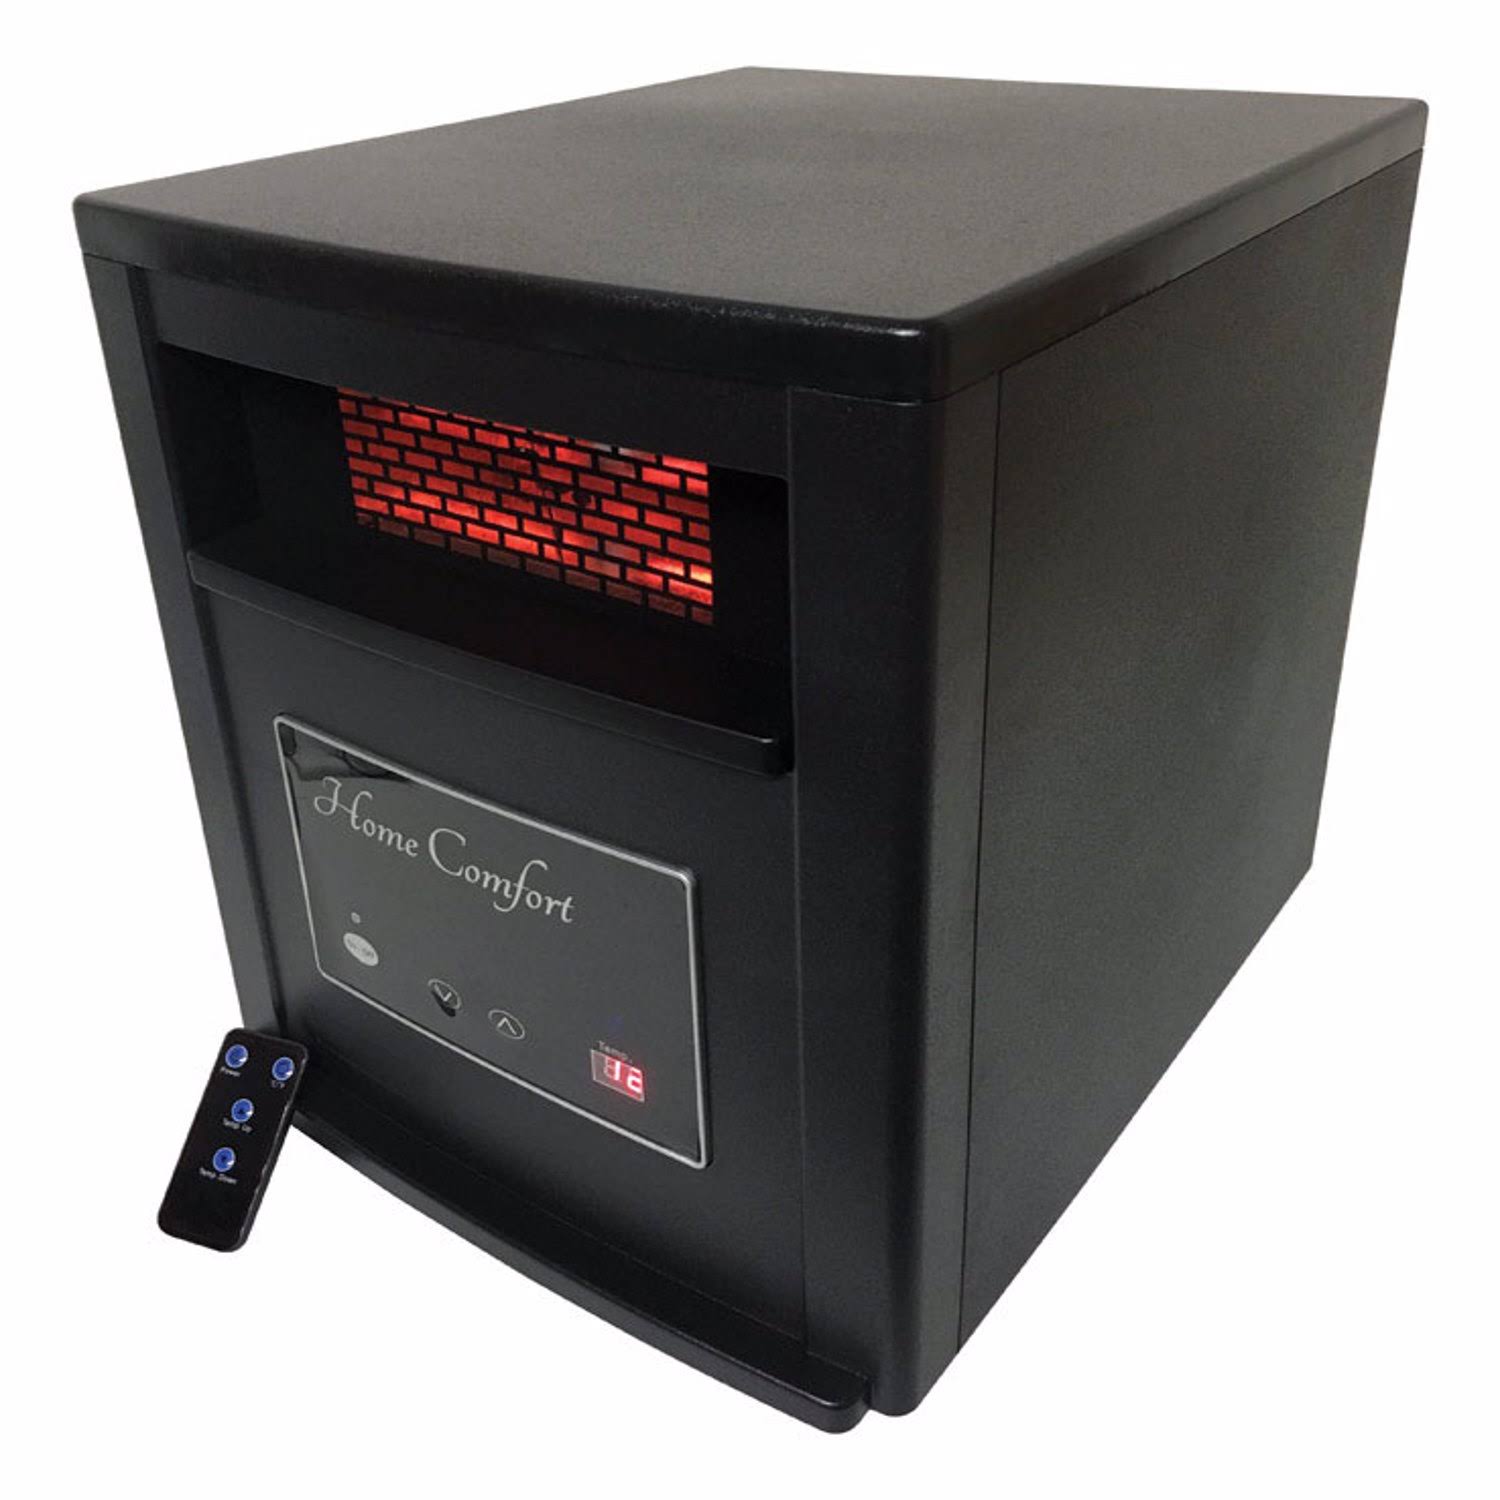 Home Comfort 1500 Sq ft Electric Infrared Portable Heater with Remote 5200 BTU